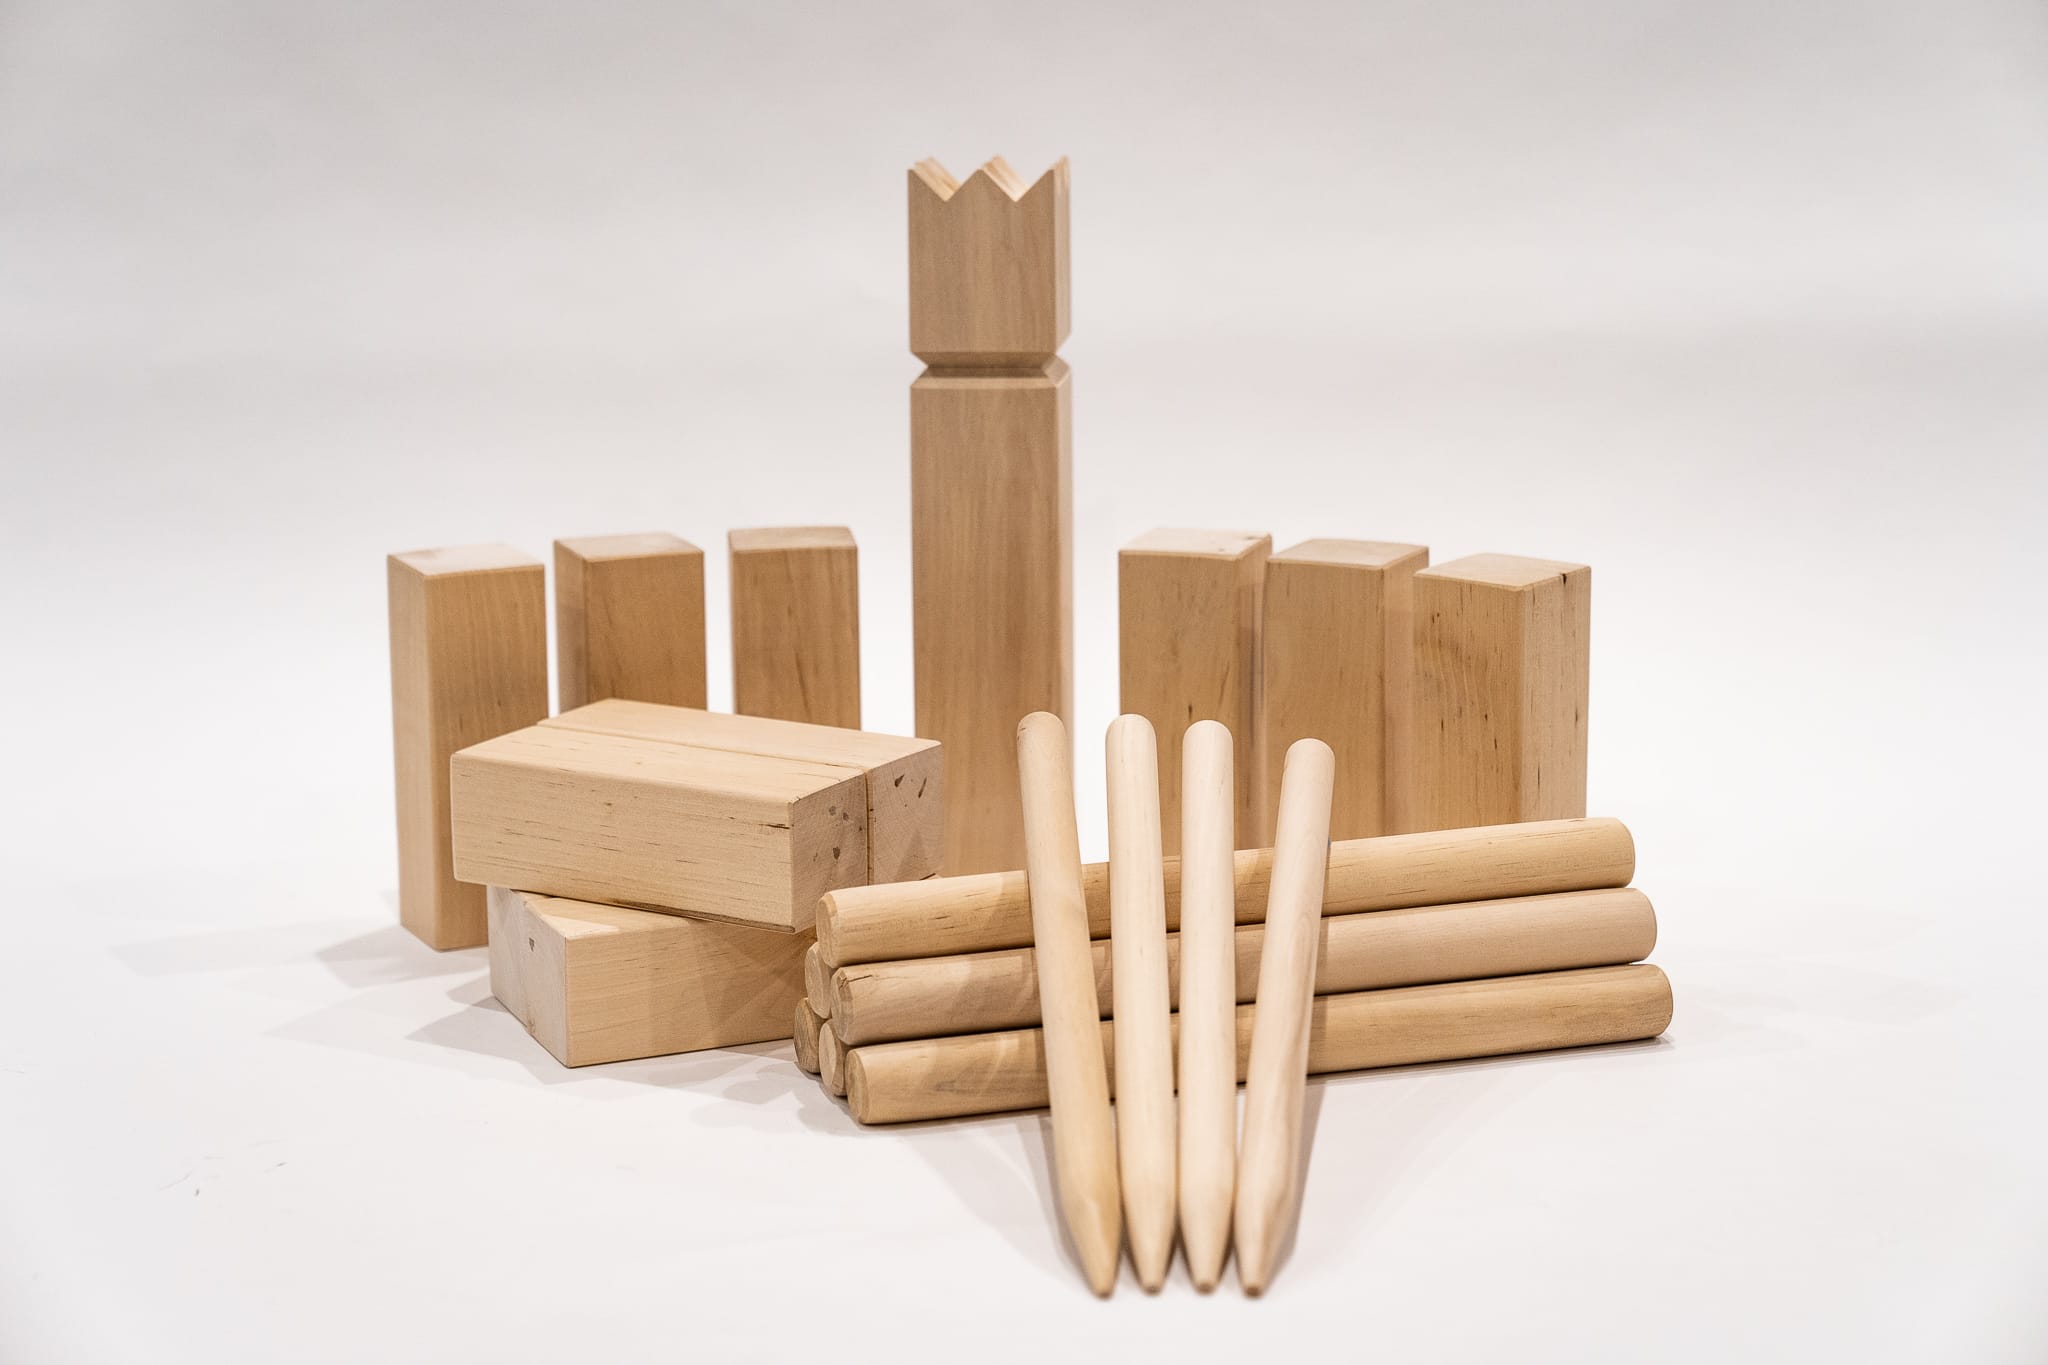 Kubb is one of the top 10 outdoor games and must haves for summer games to play. Buy online for delivery to New Zealand locations